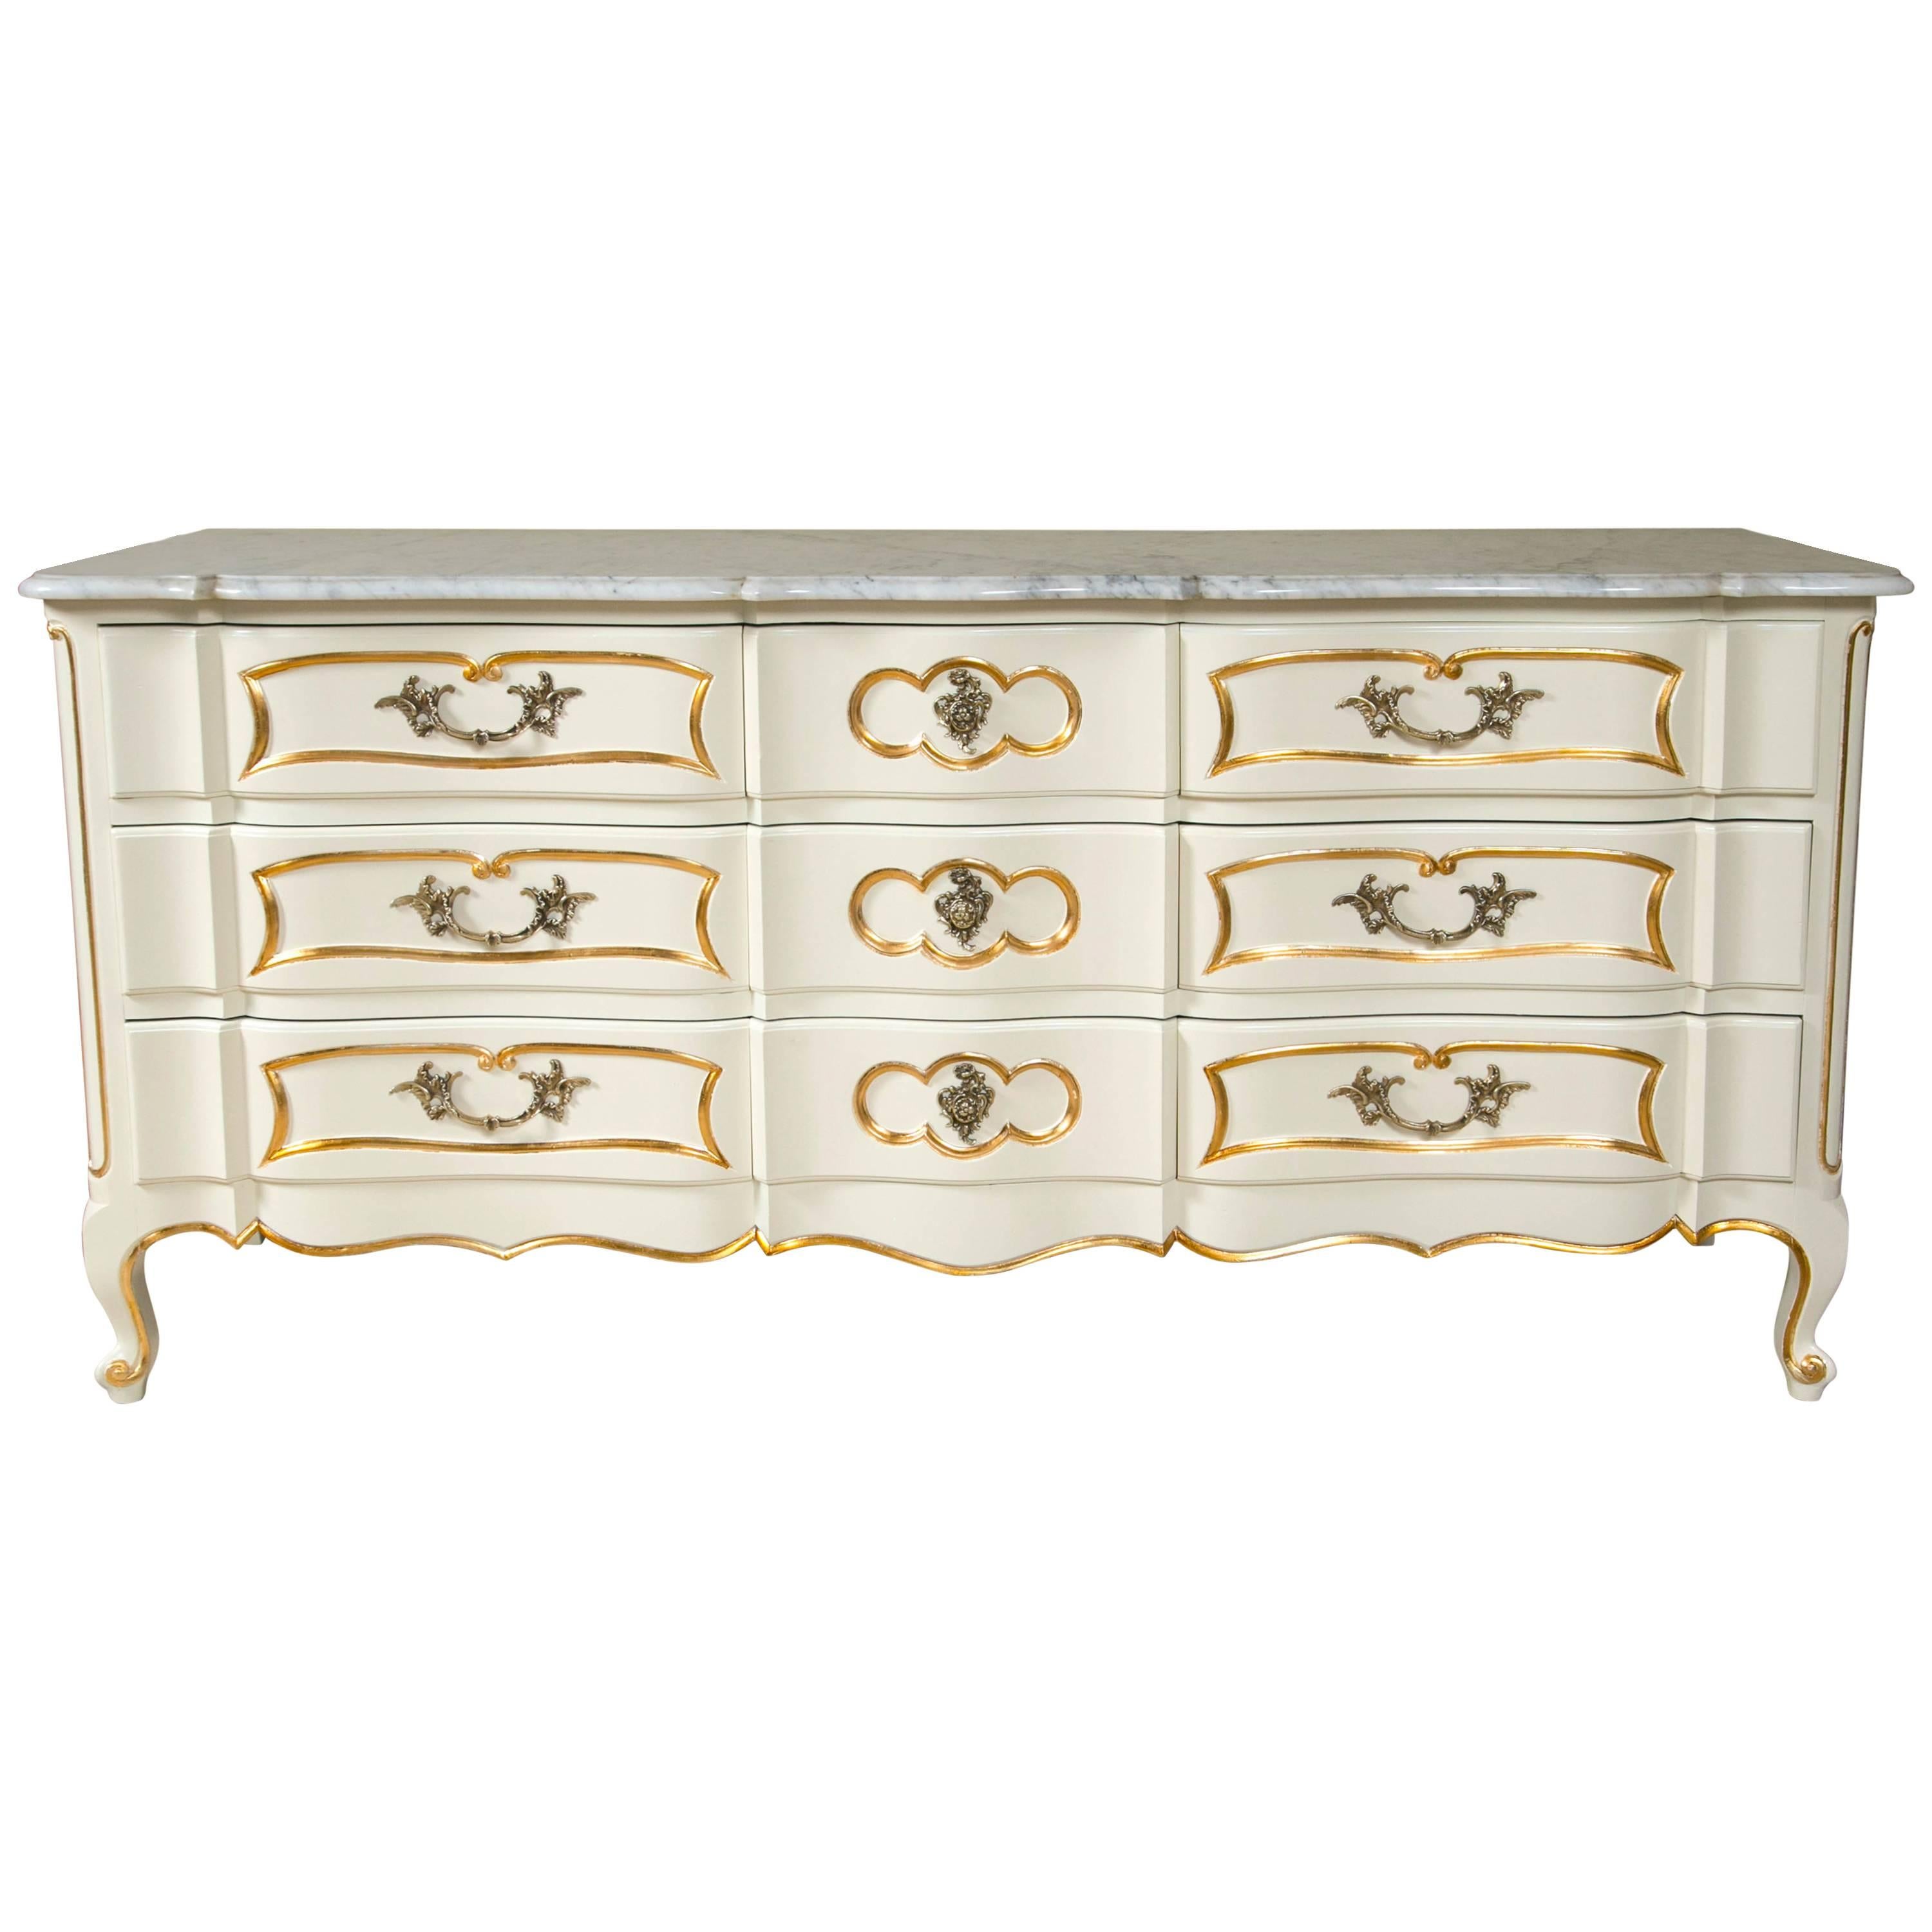 Louis XV Style Marble Top Painted and Gilt Decorated Dresser Commode Nine Drawer